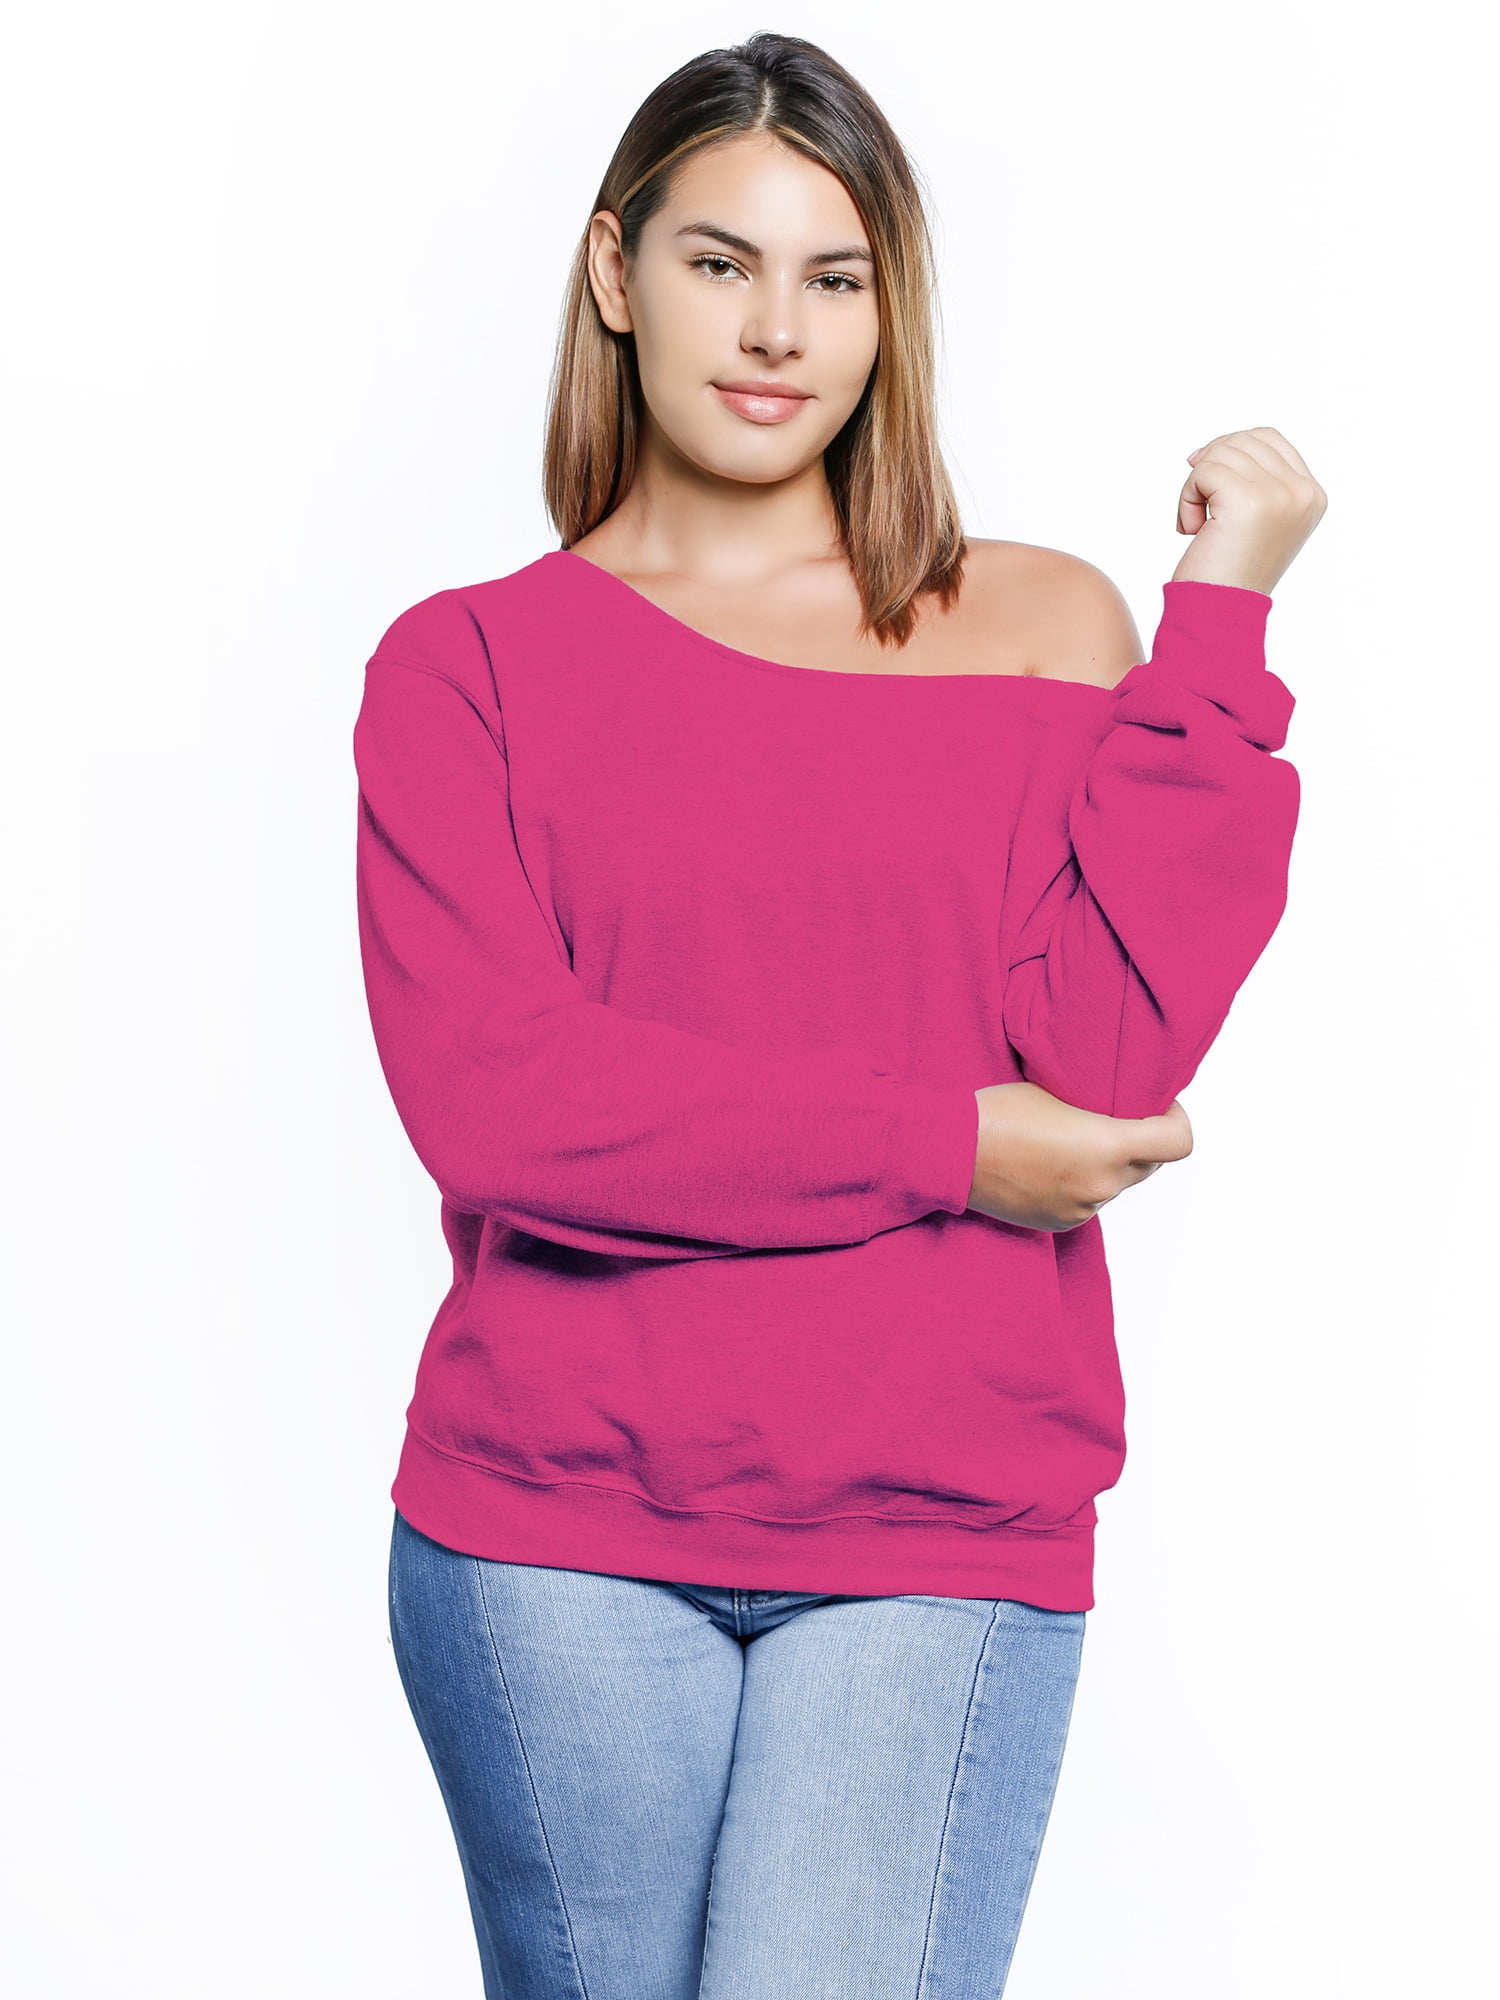 Awkward Styles Off Shoulder Sweatshirt Plus Size Clothing for Women Plus Size Off The Shoulder Cute Curvy Sweatshirt for Women Cute Plus Size Tops Women's Sweater Off The Shoulder -